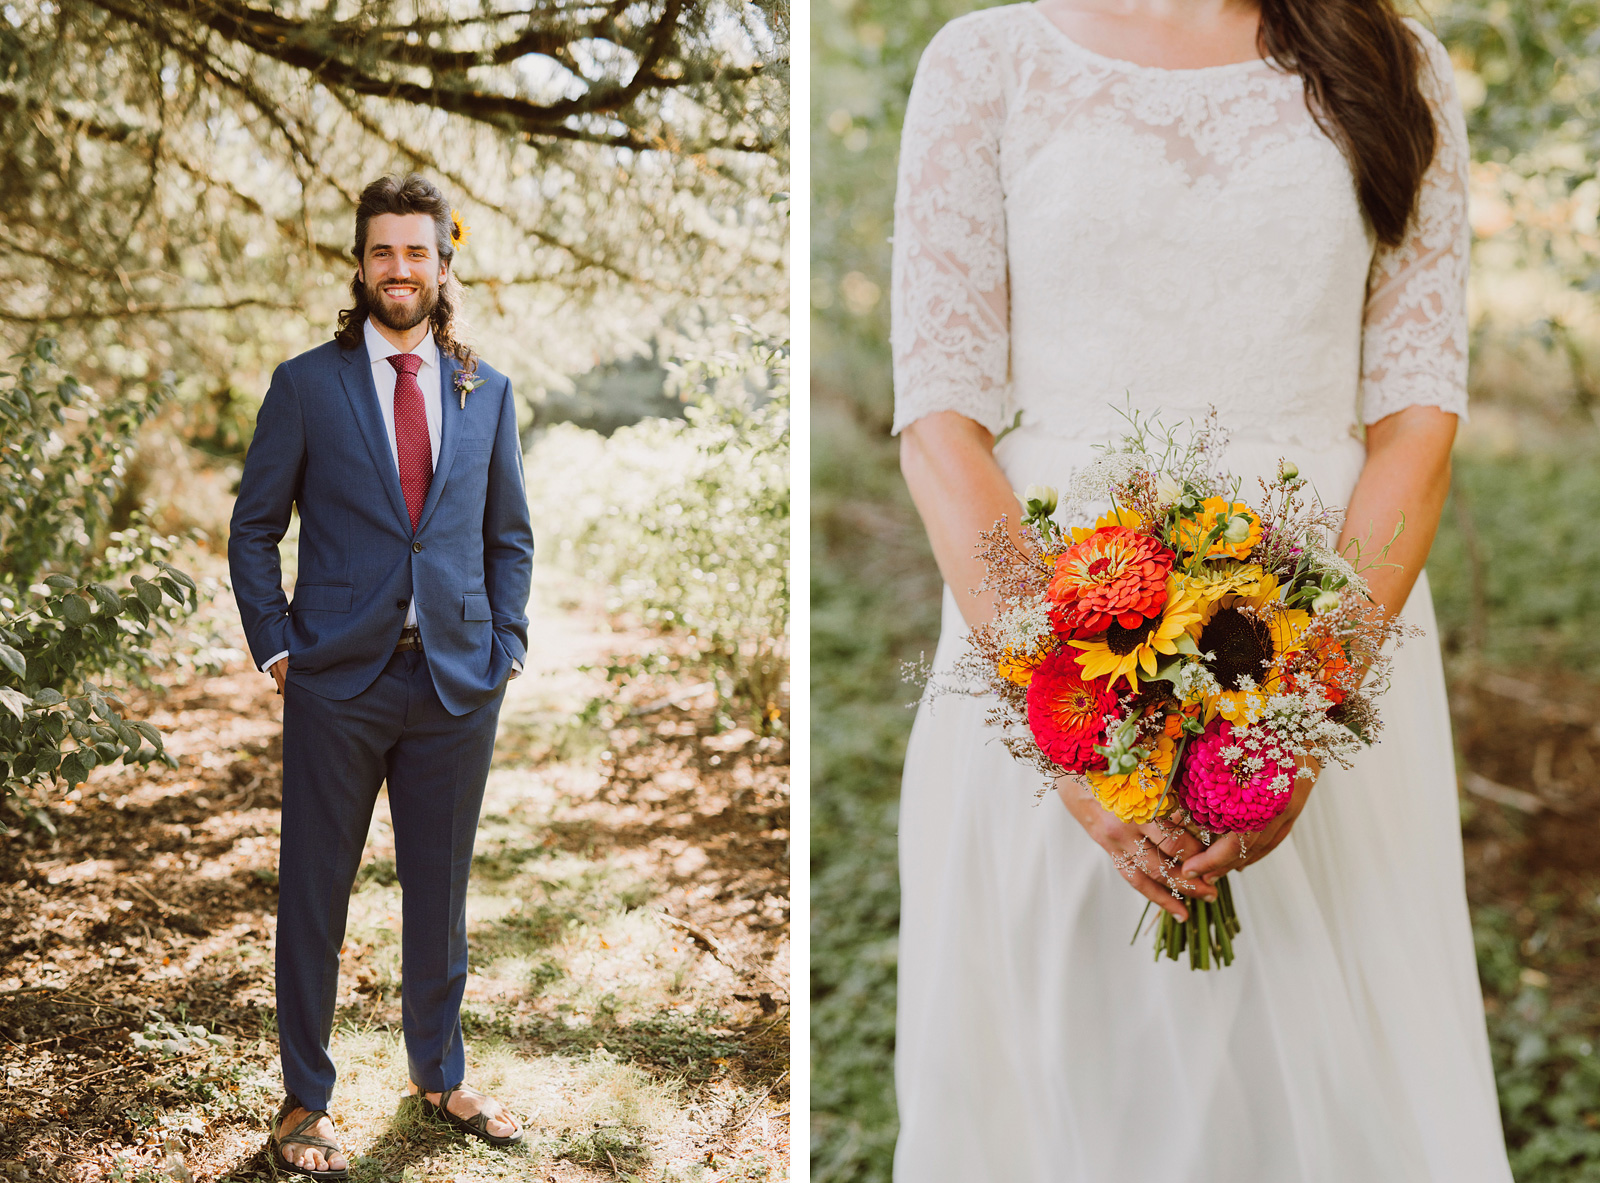 Portraits of the bride and groom at the Croft Farm | Sauvie Island Wedding